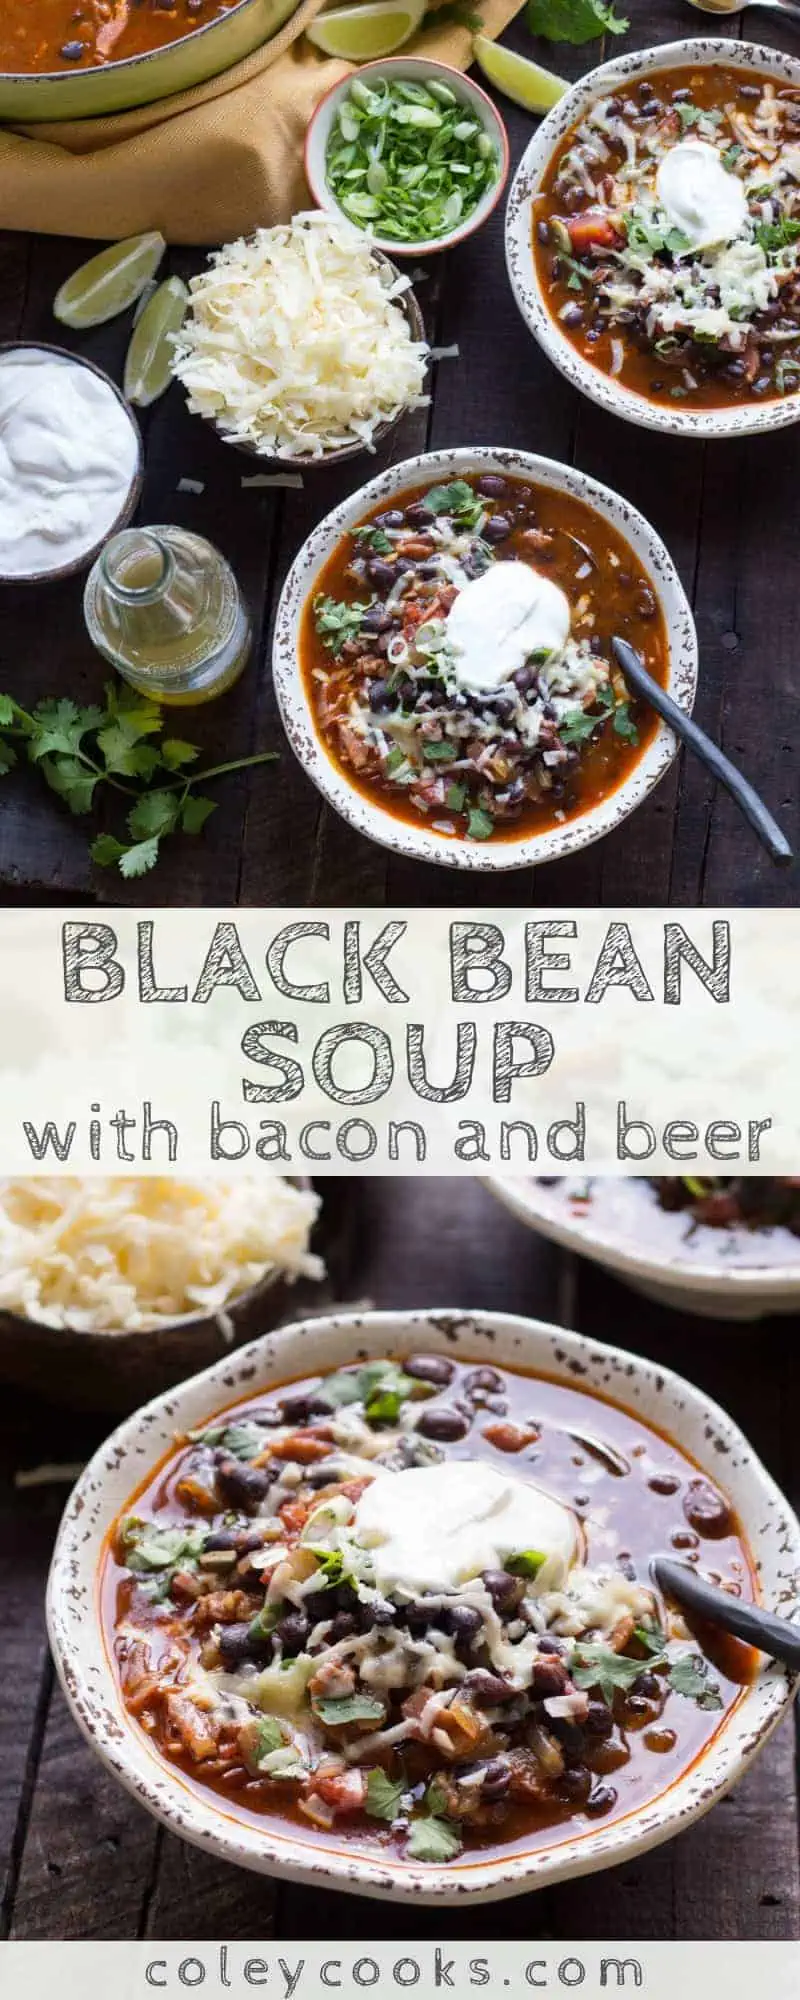 This Black Bean Soup with bacon + beer is so easy, super flavorful and perfect for watching football! Best recipe for Super Bowl Sunday! #easy #soup #recipe #bacon #beer #football #superbowl #beans #texmex